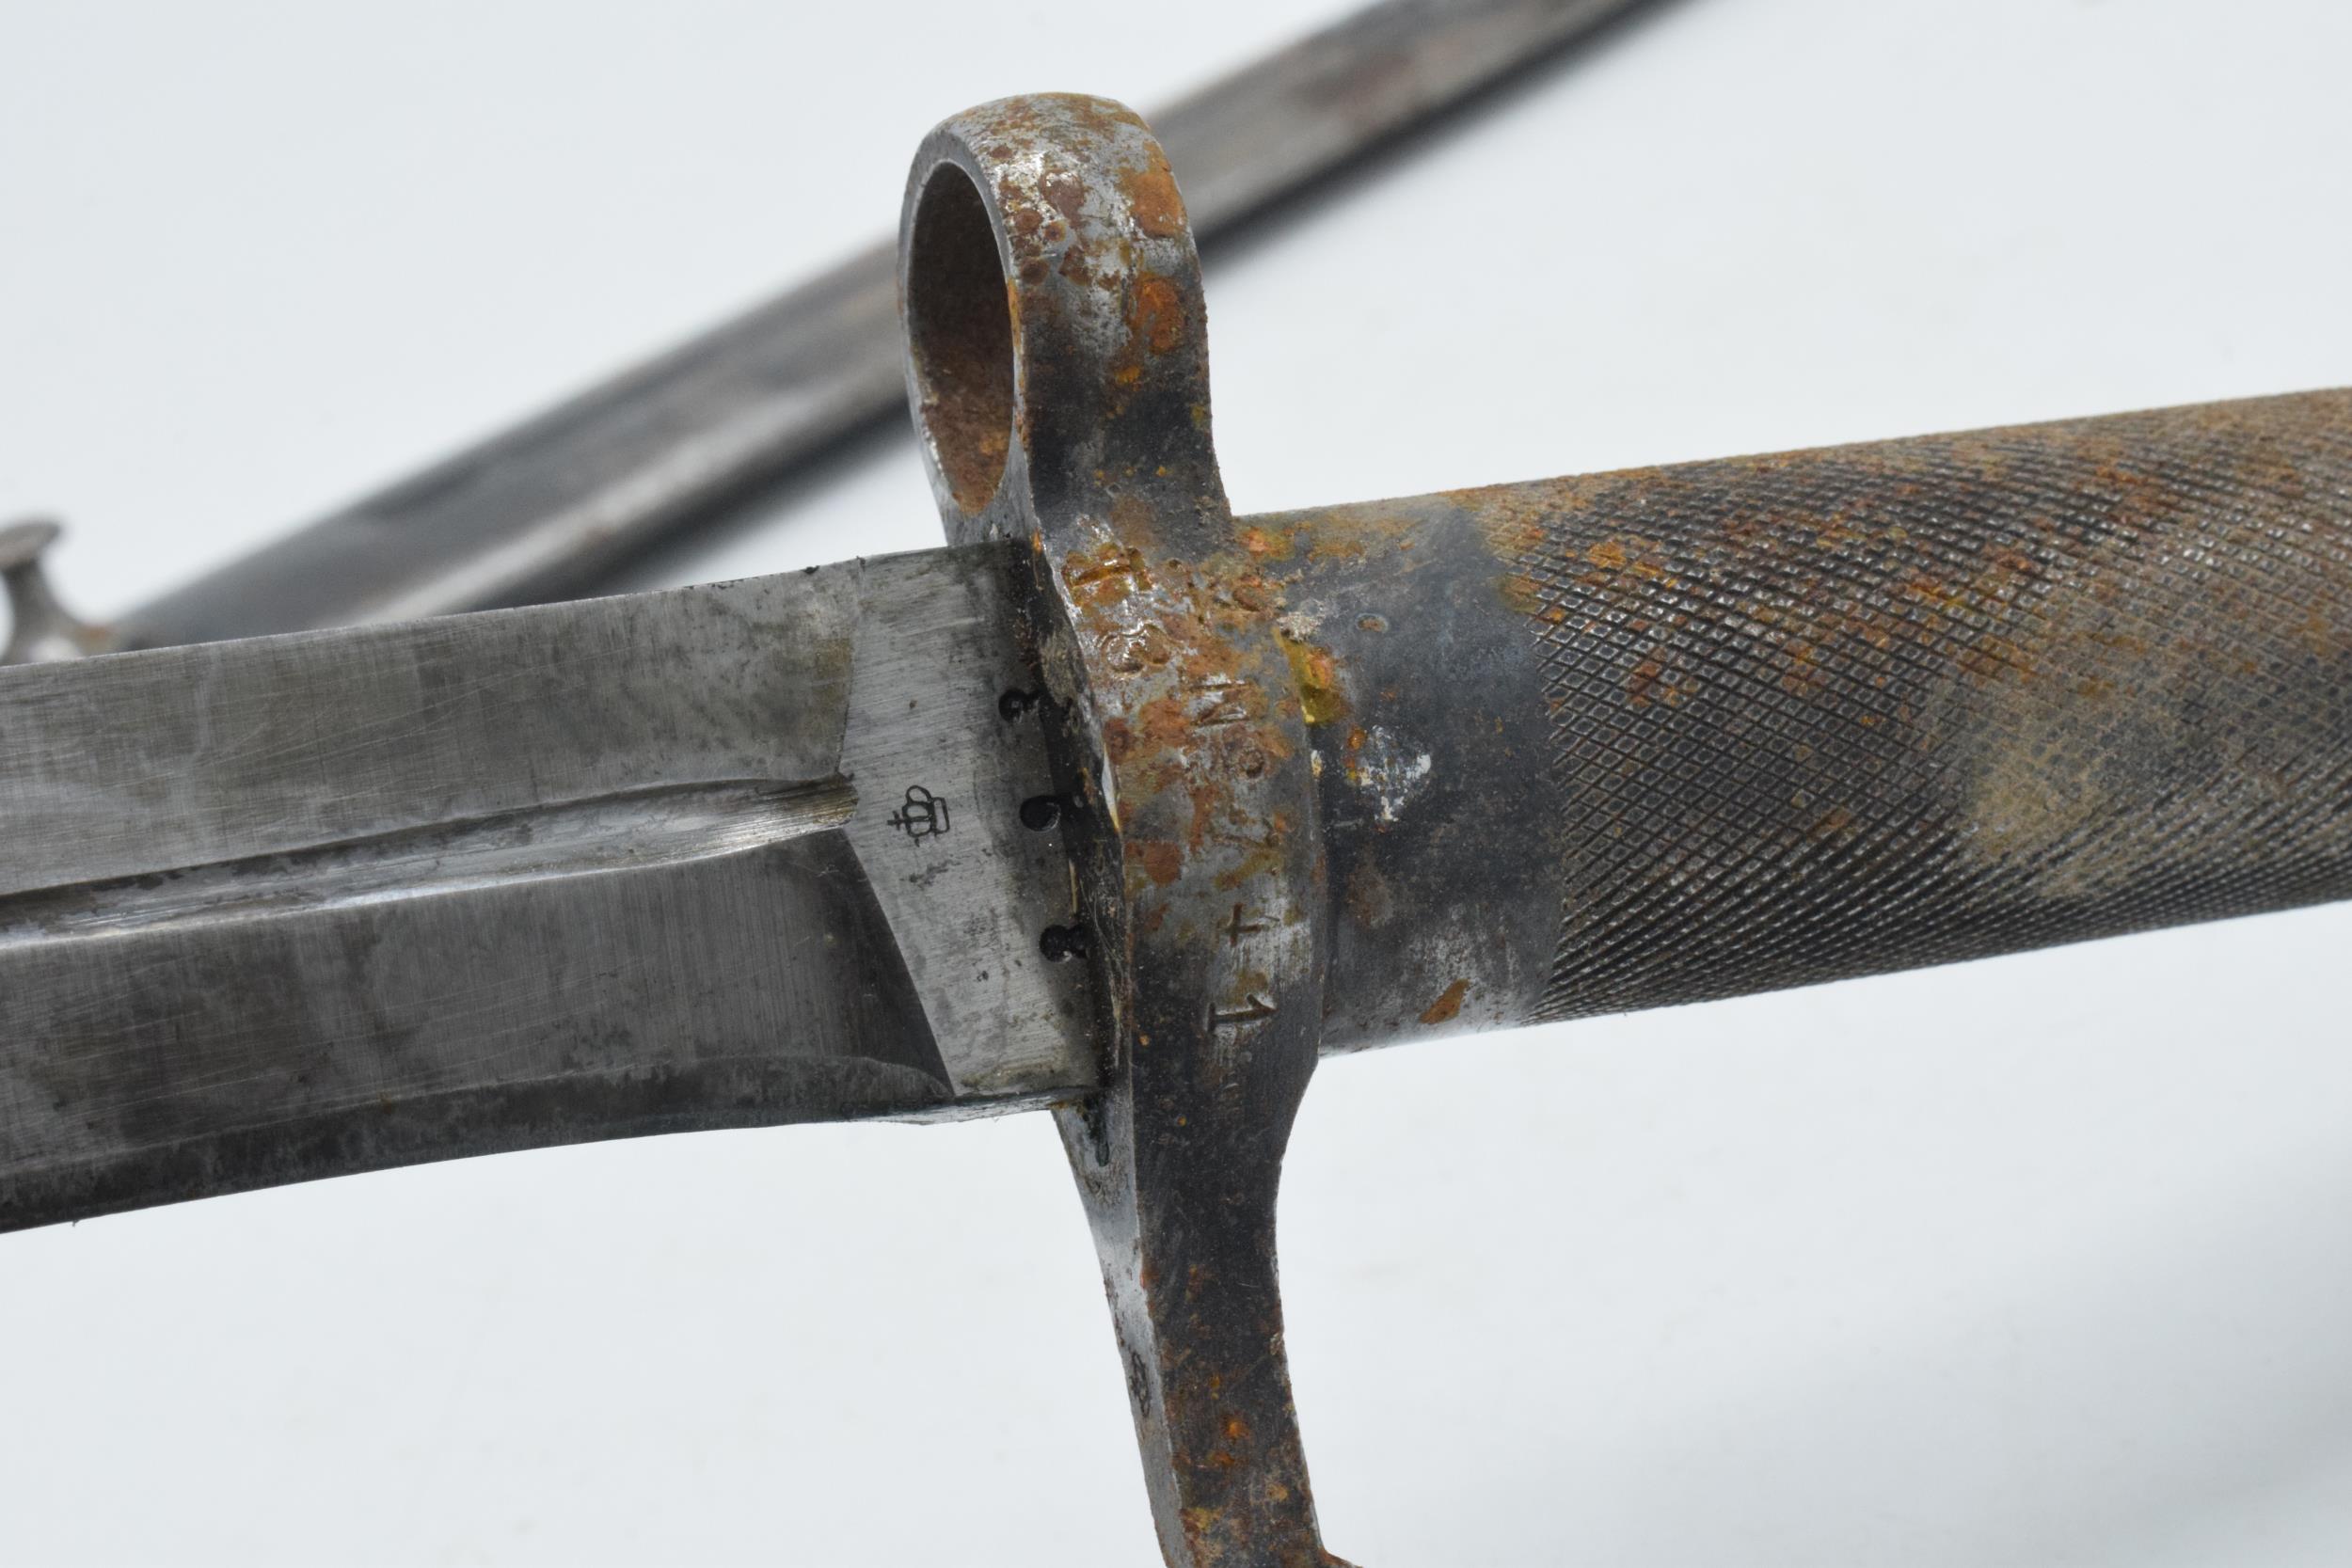 Unusual early 20th century steel bayonet / dagger with metal scabbard and screw tightener / - Image 6 of 7